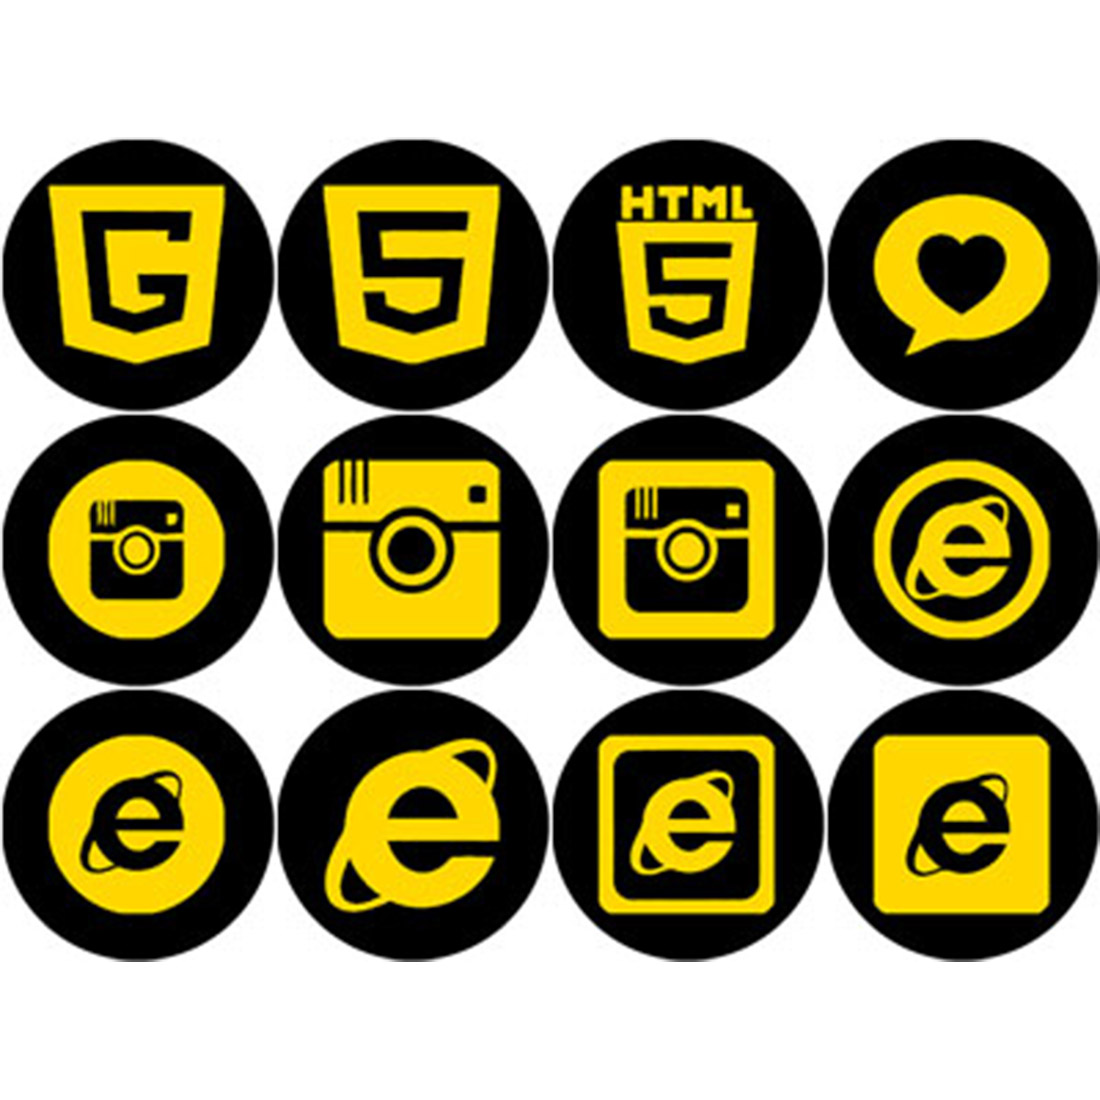 GOLD AND BLACK SOCIAL MEDIA ROUND ICONS cover image.